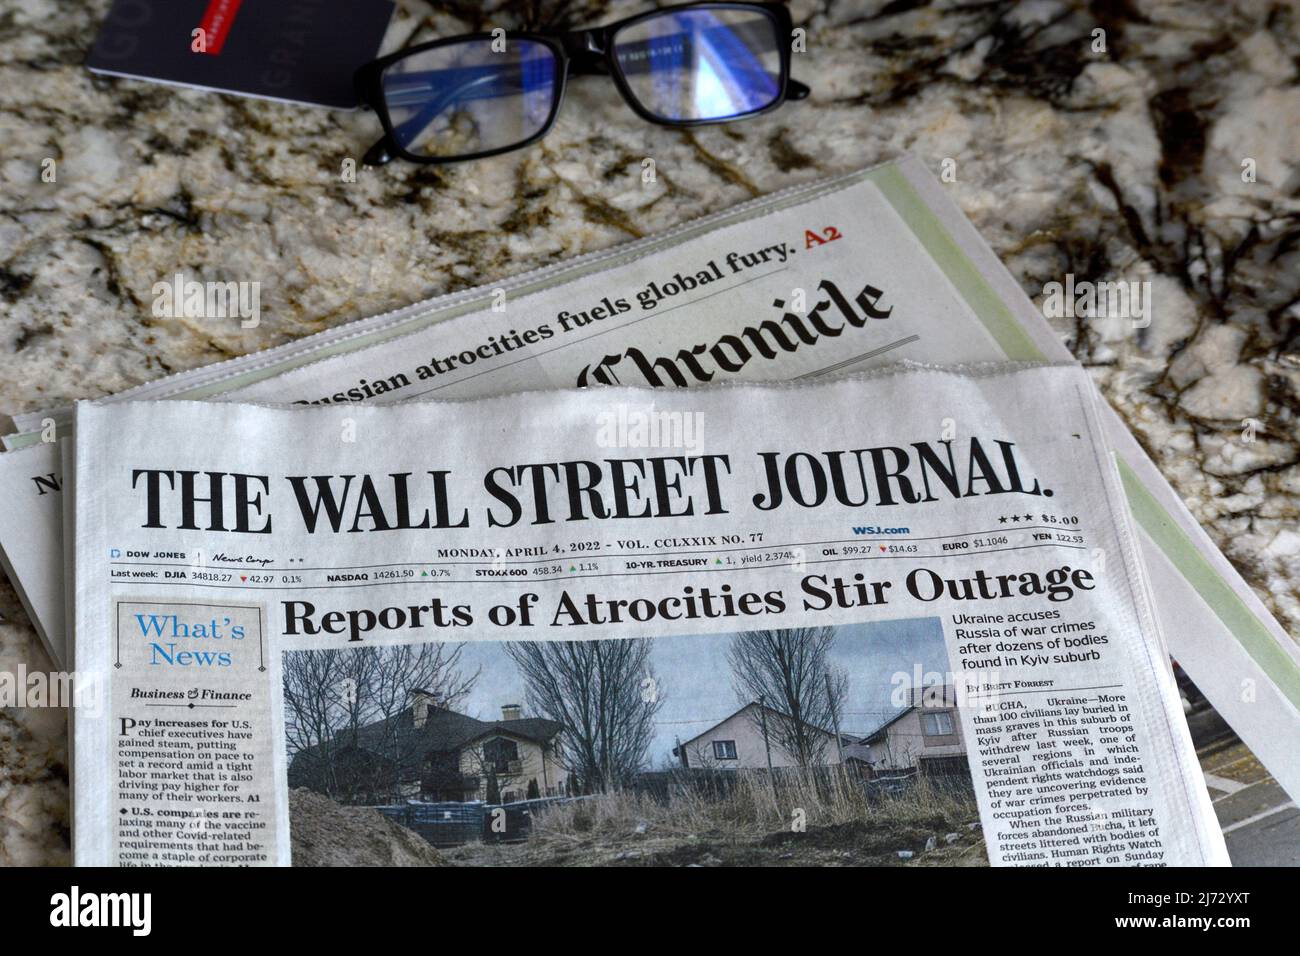 A copy of The Wall Street Journal with a headline regarding reports of atrocities in Ukraine by Russian military lies on a hotel bed in San Francisco. Stock Photo